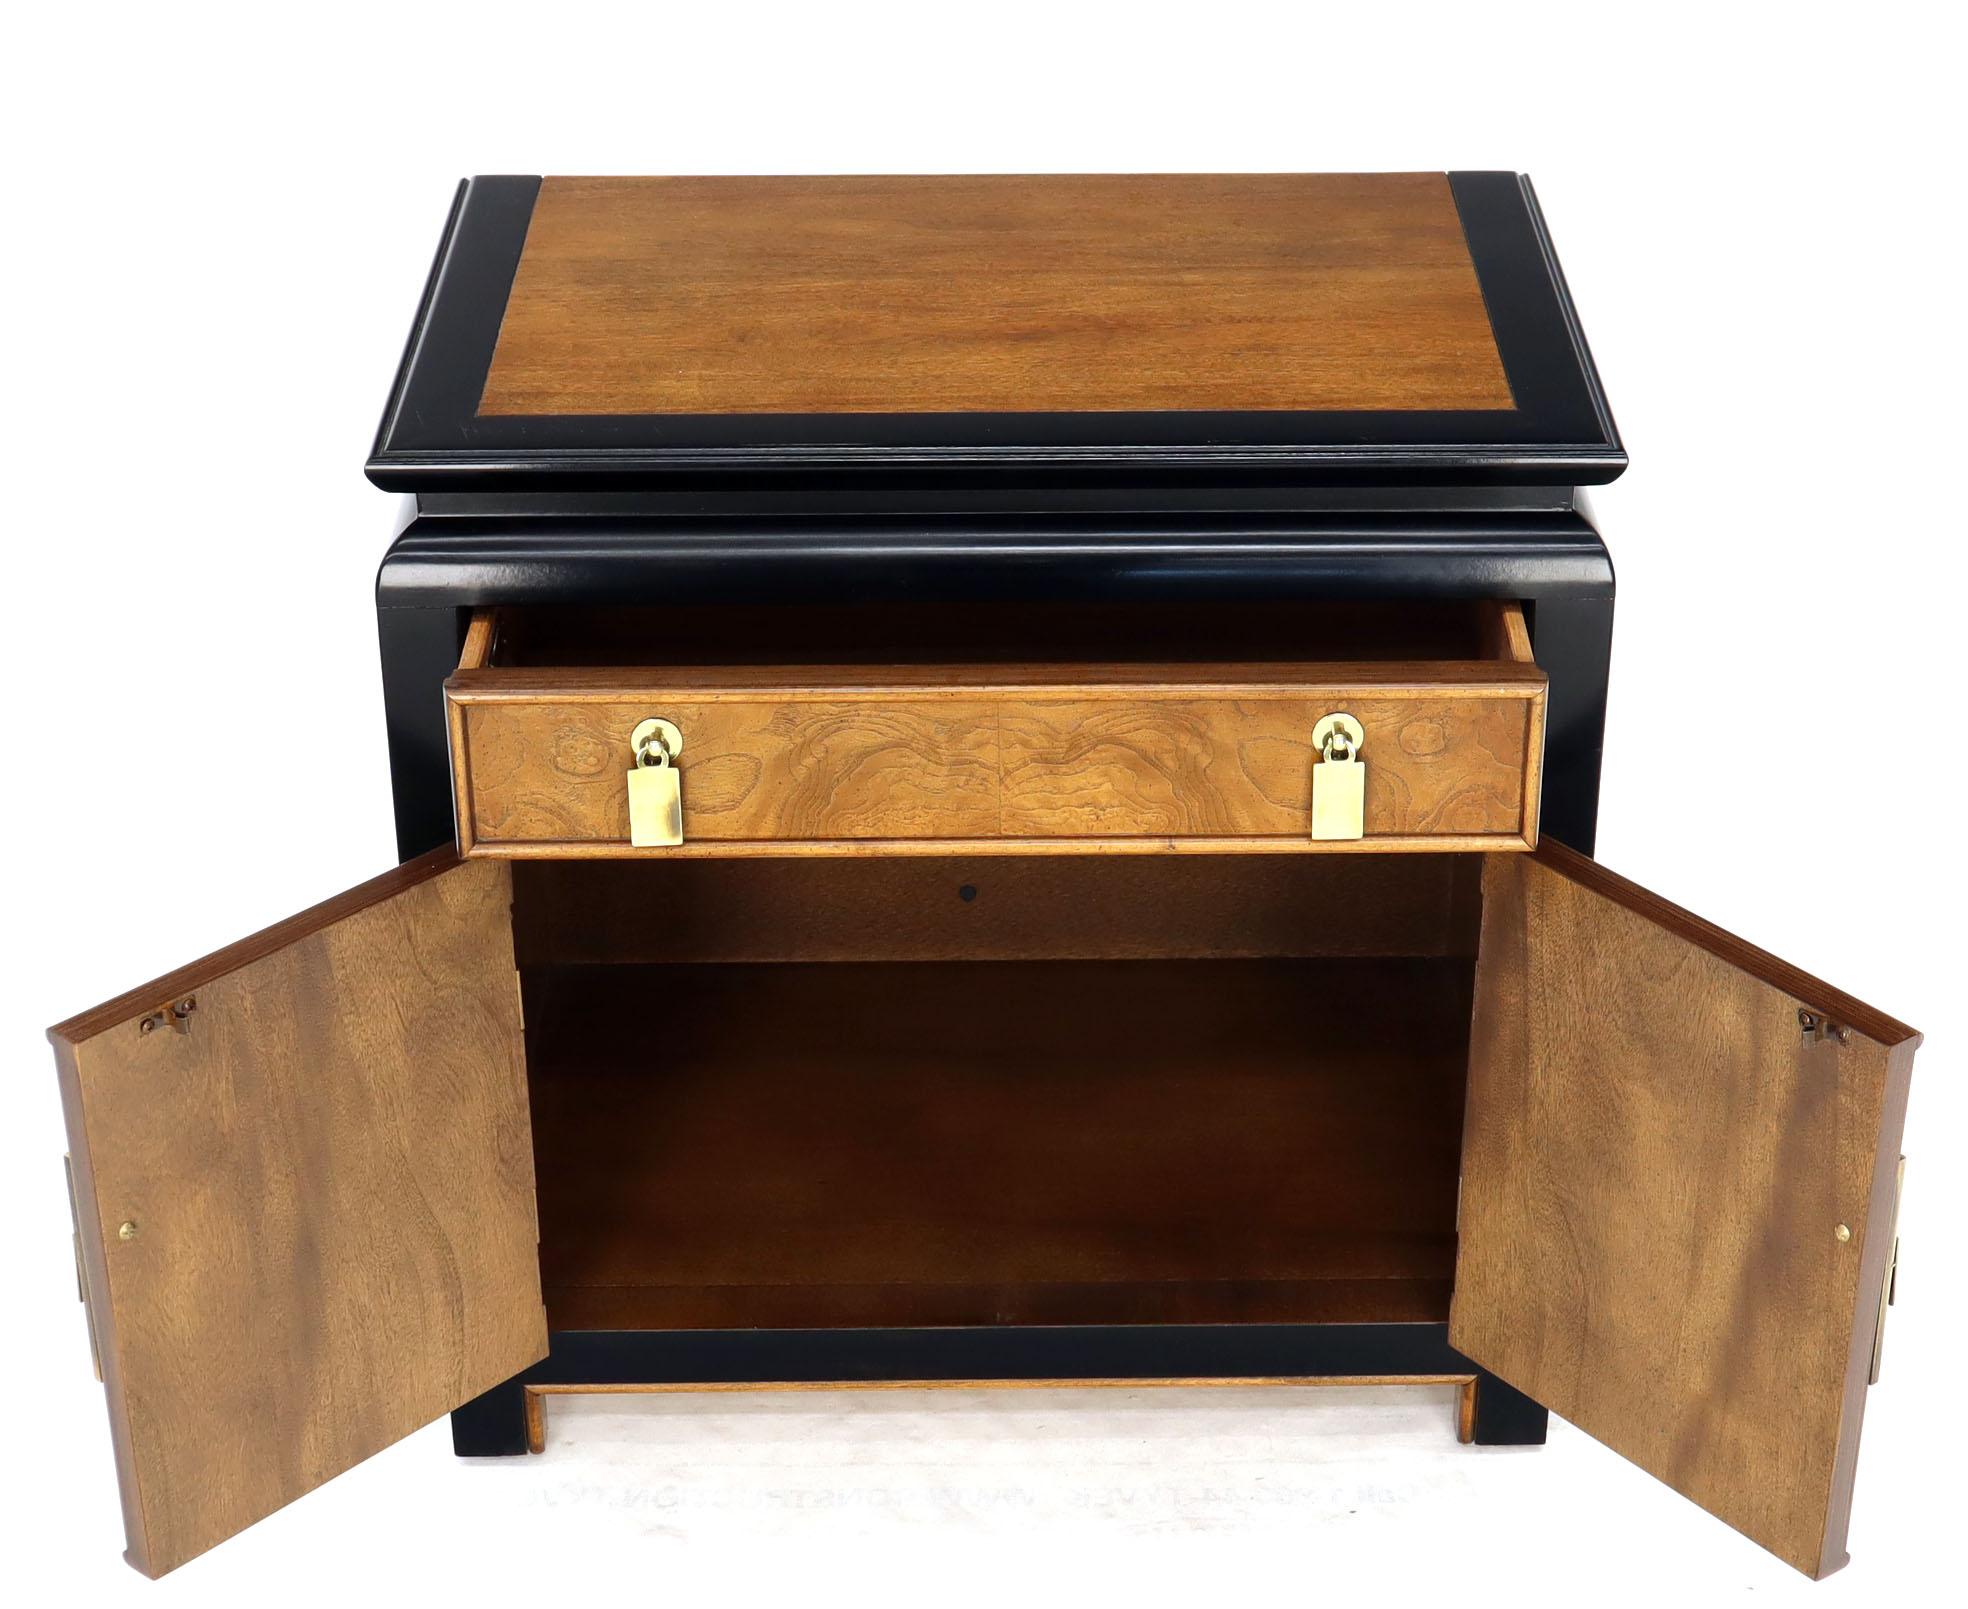 Black Lacquer Burl Wood Brass Hardware 1 Drawer Double Door Compartment Stand 2